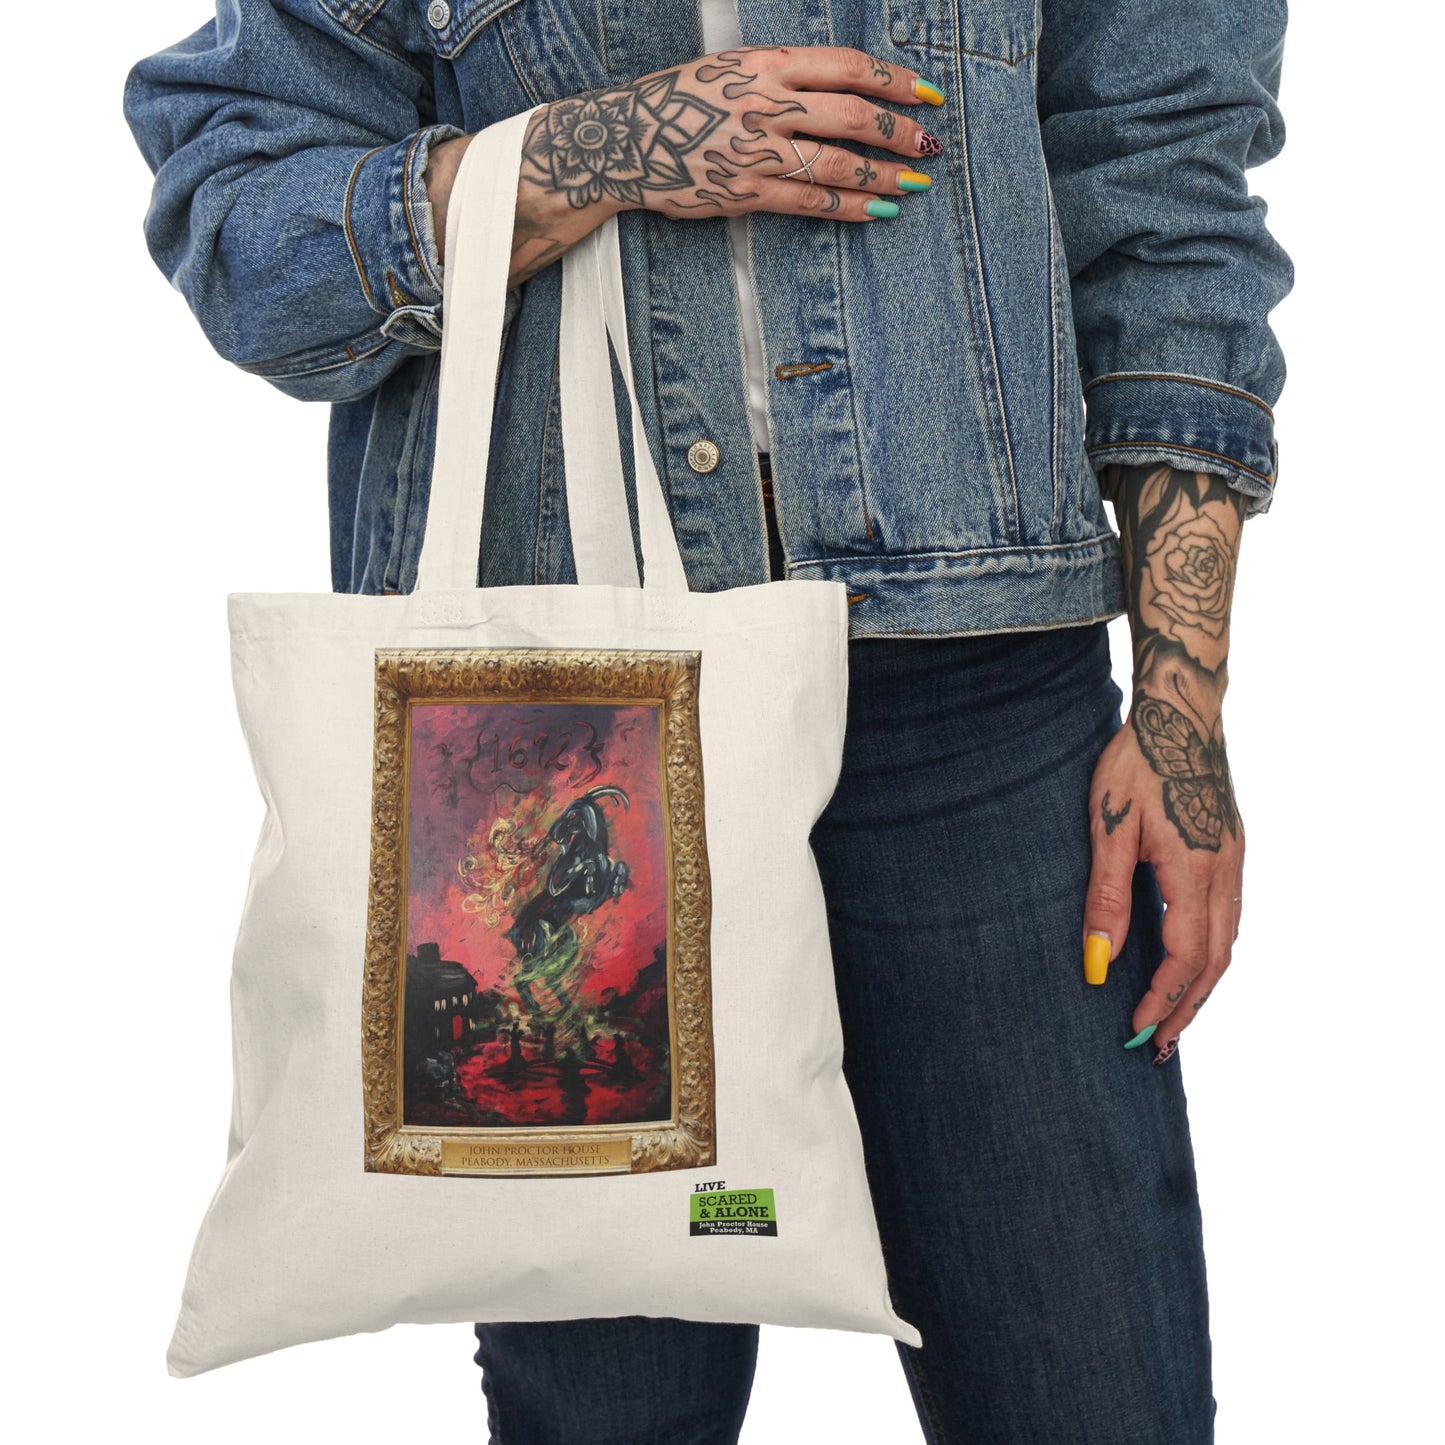 Scared & Alone Richard-Lael's "The John Proctor House" Gallery Natural Tote